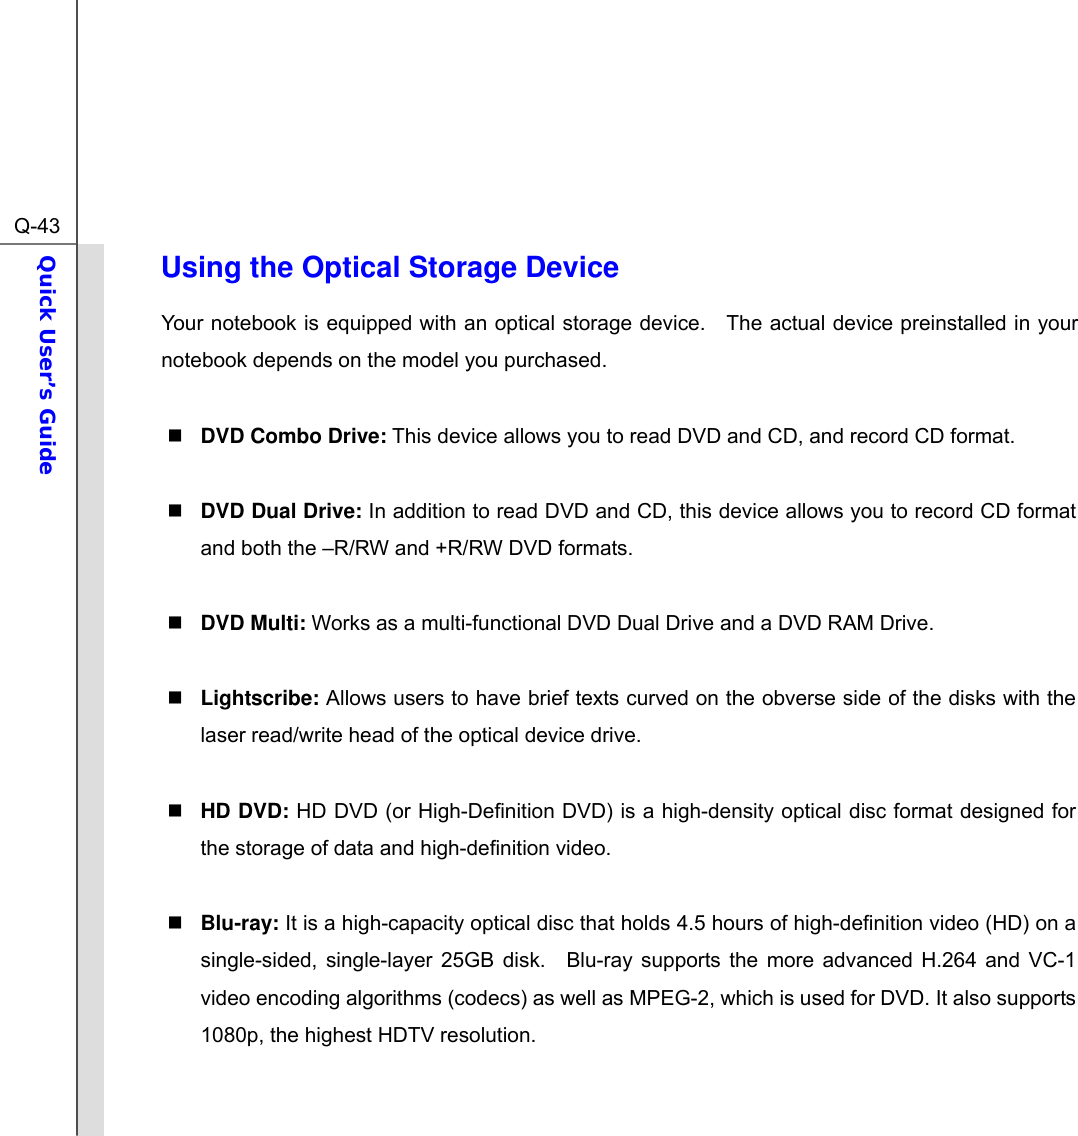  Q-43Quick User’s Guide  Using the Optical Storage Device Your notebook is equipped with an optical storage device.   The actual device preinstalled in your notebook depends on the model you purchased.   DVD Combo Drive: This device allows you to read DVD and CD, and record CD format.   DVD Dual Drive: In addition to read DVD and CD, this device allows you to record CD format and both the –R/RW and +R/RW DVD formats.   DVD Multi: Works as a multi-functional DVD Dual Drive and a DVD RAM Drive.   Lightscribe: Allows users to have brief texts curved on the obverse side of the disks with the laser read/write head of the optical device drive.     HD DVD: HD DVD (or High-Definition DVD) is a high-density optical disc format designed for the storage of data and high-definition video.   Blu-ray: It is a high-capacity optical disc that holds 4.5 hours of high-definition video (HD) on a single-sided, single-layer 25GB disk.  Blu-ray supports the more advanced H.264 and VC-1 video encoding algorithms (codecs) as well as MPEG-2, which is used for DVD. It also supports 1080p, the highest HDTV resolution.   